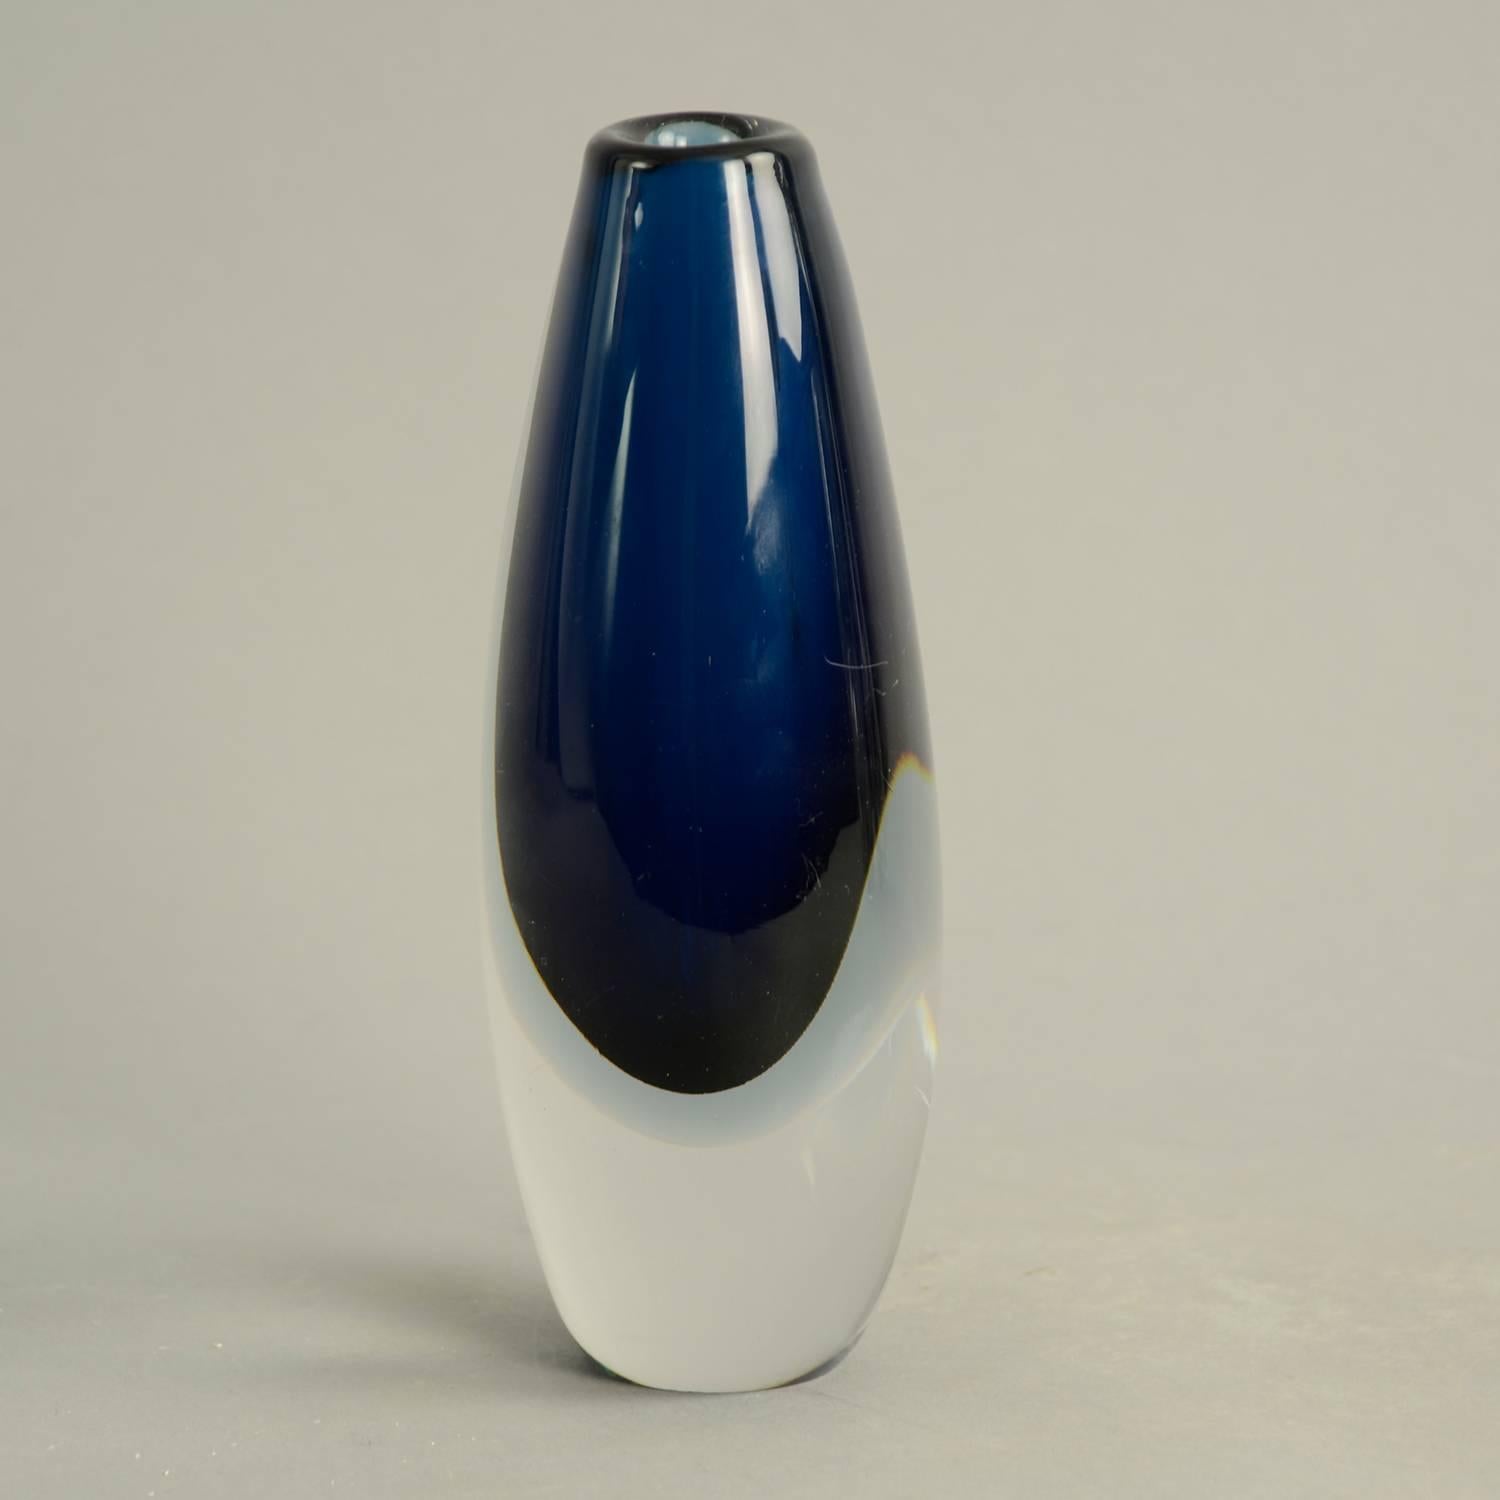 Vicke Lindstrand for Kosta, Sweden 

Sommerso vase in blue and clear glass, 1950s.
Measures: Height 6 3/4